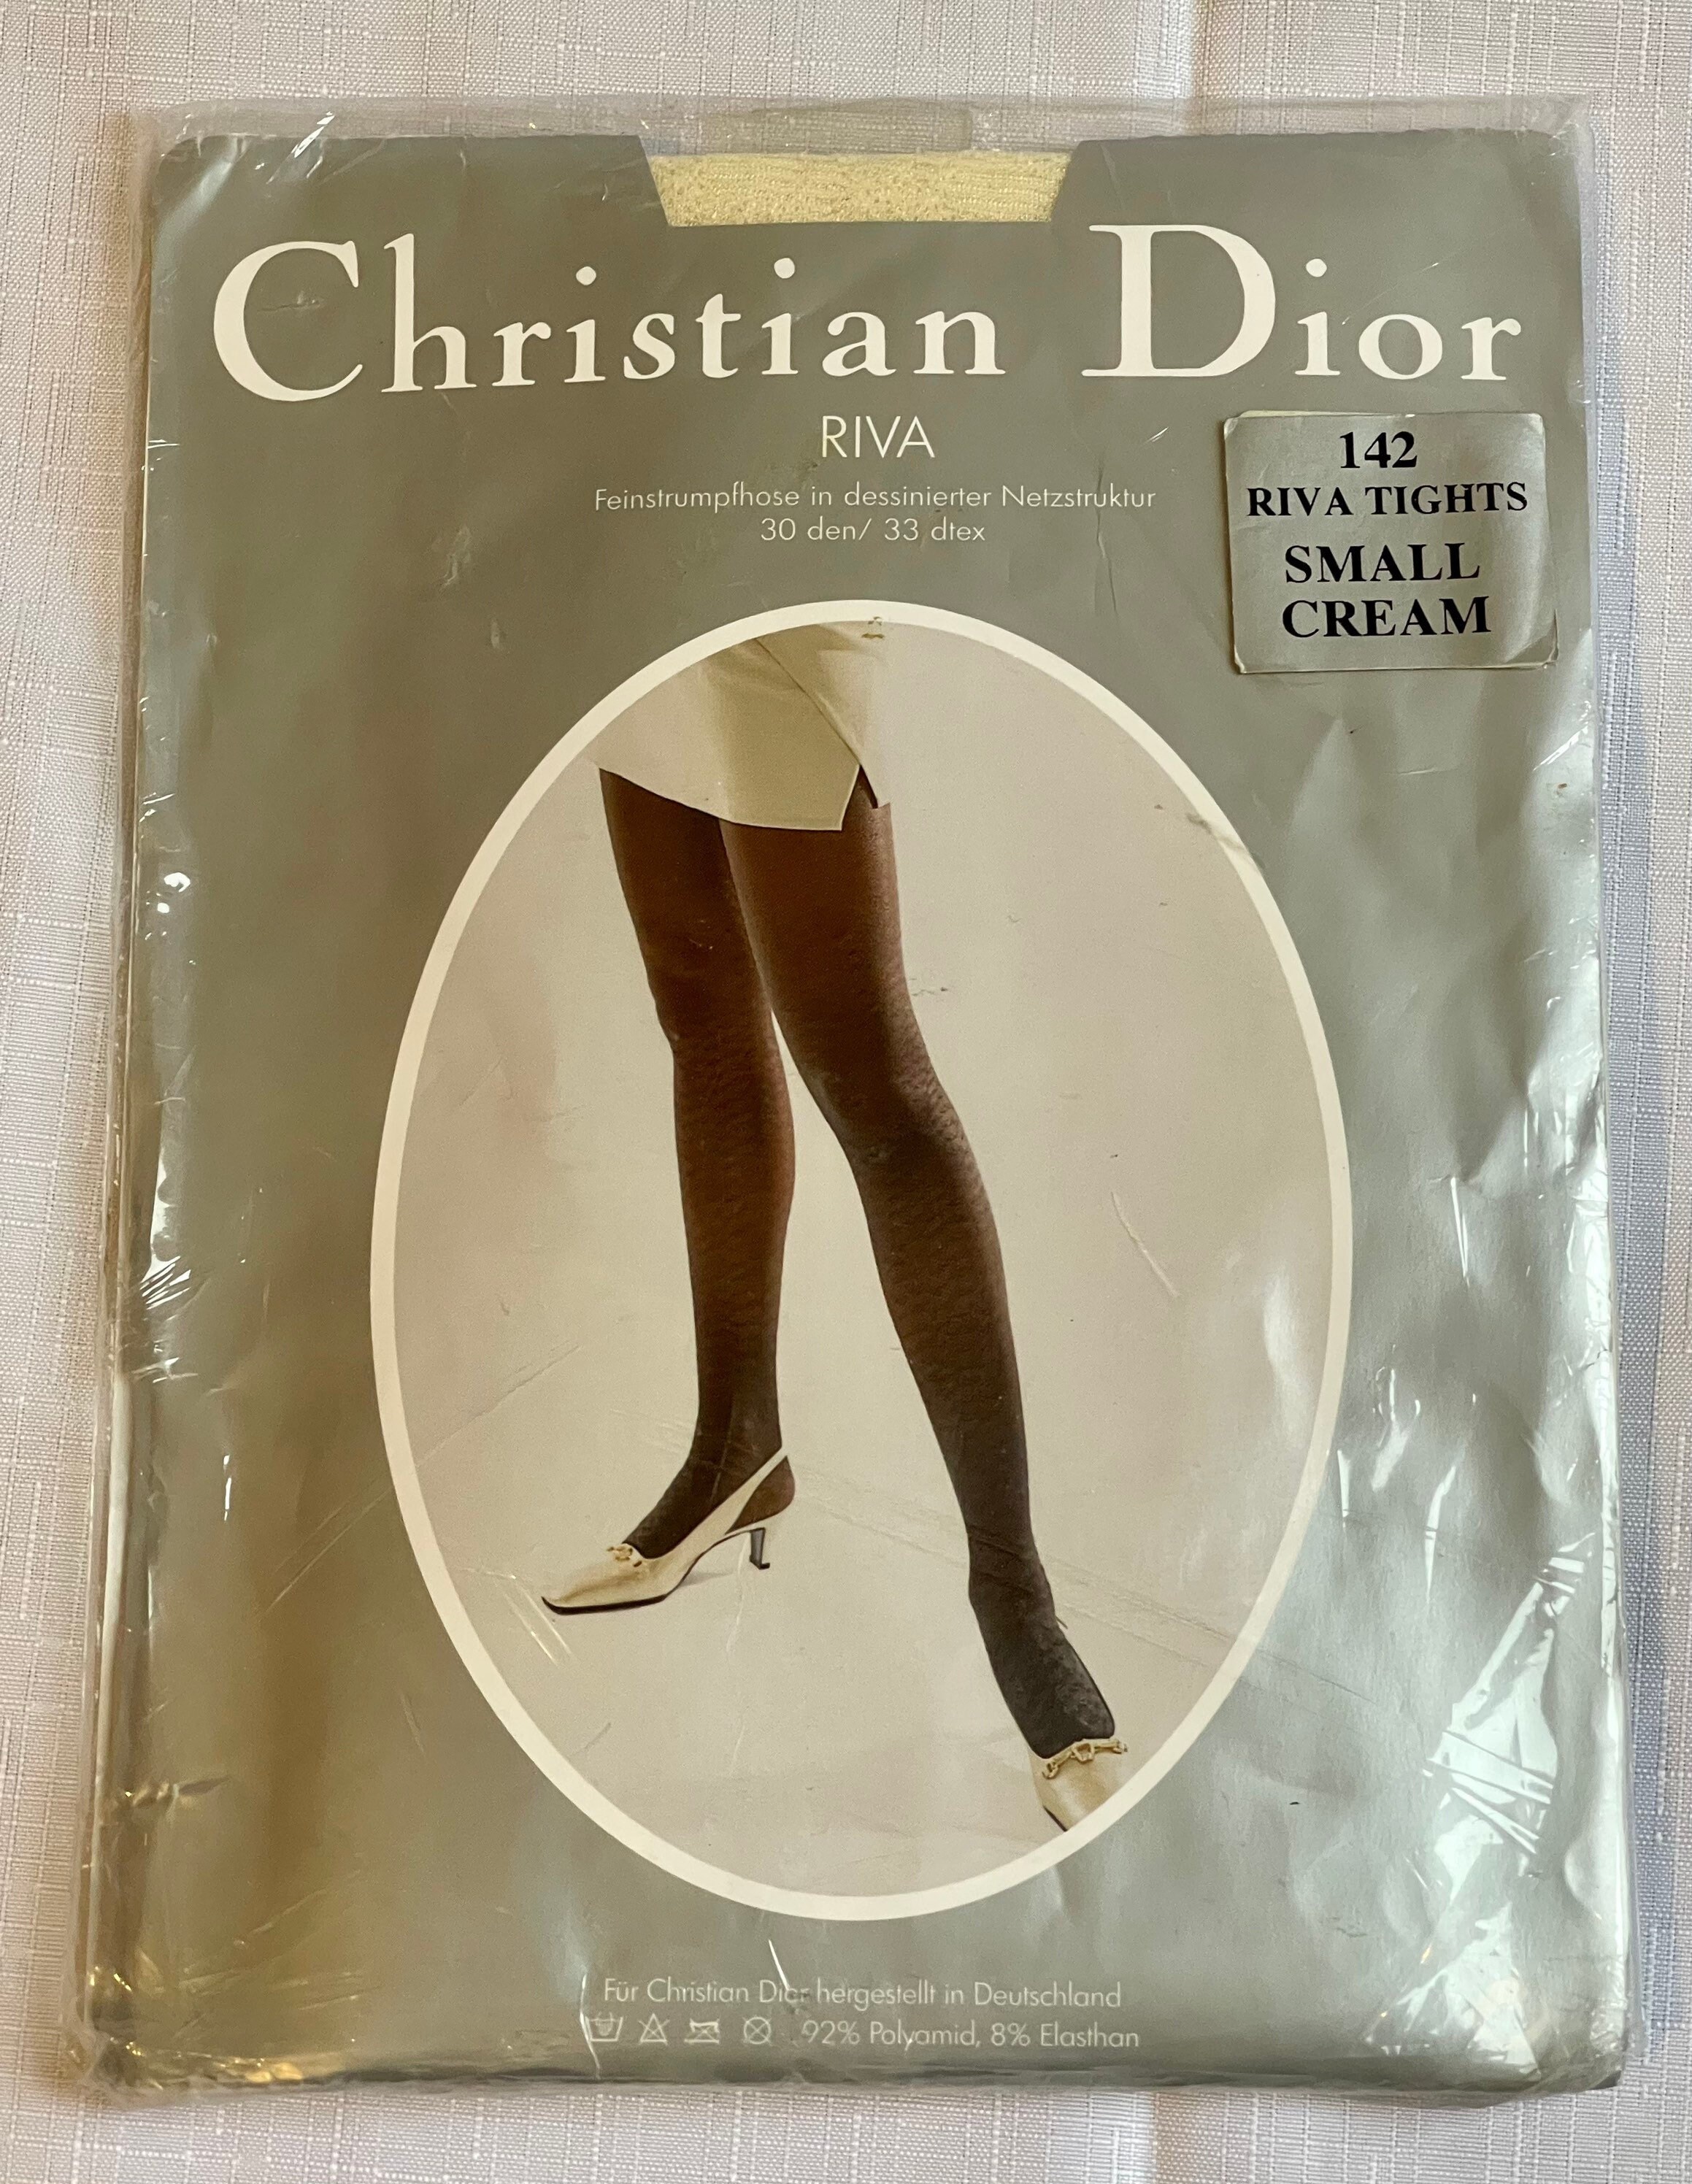 Christian Dior Cream Tights. Vintage/retro Tights, as New and Still in  Packaging Going Back to the 80s. Labelled as 142 Riva Small Cream. 